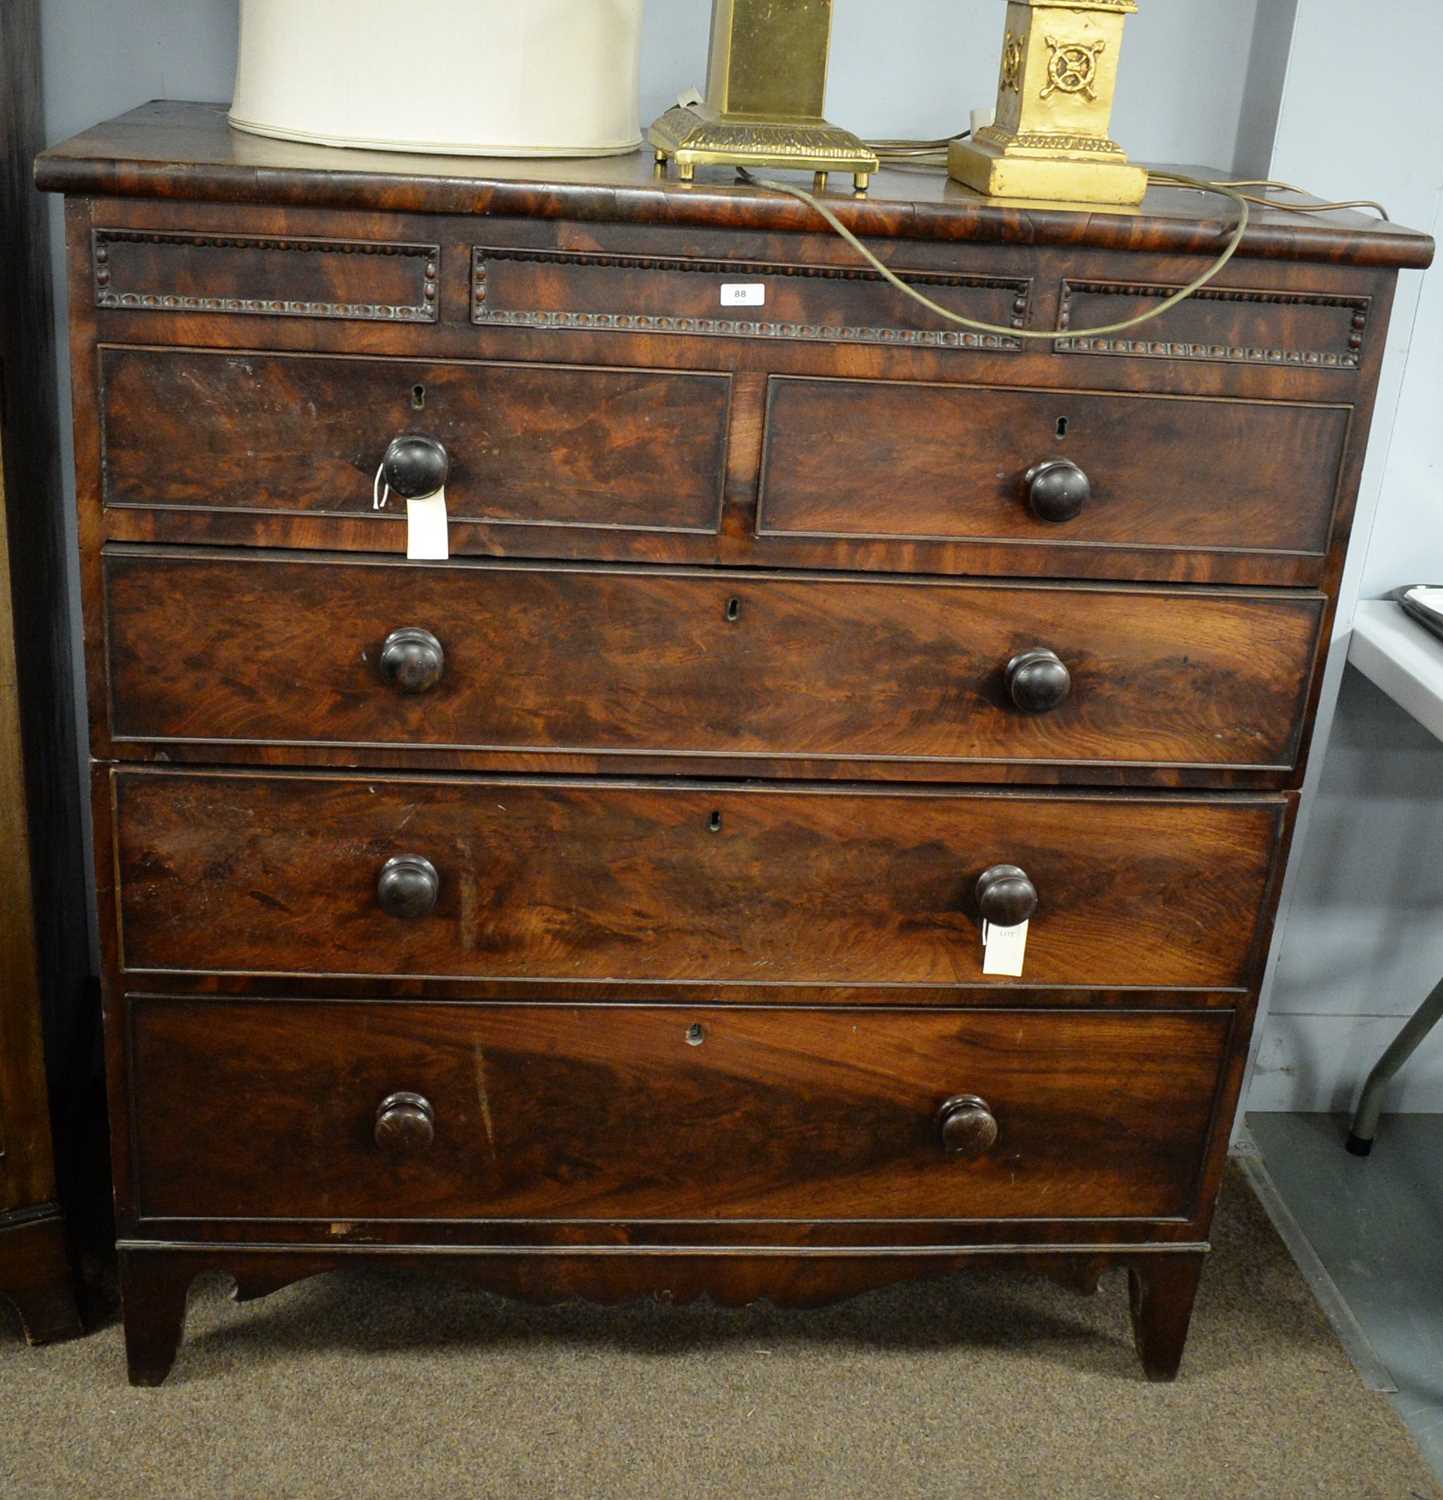 Lot 88 - An early 19th Century chest of drawers